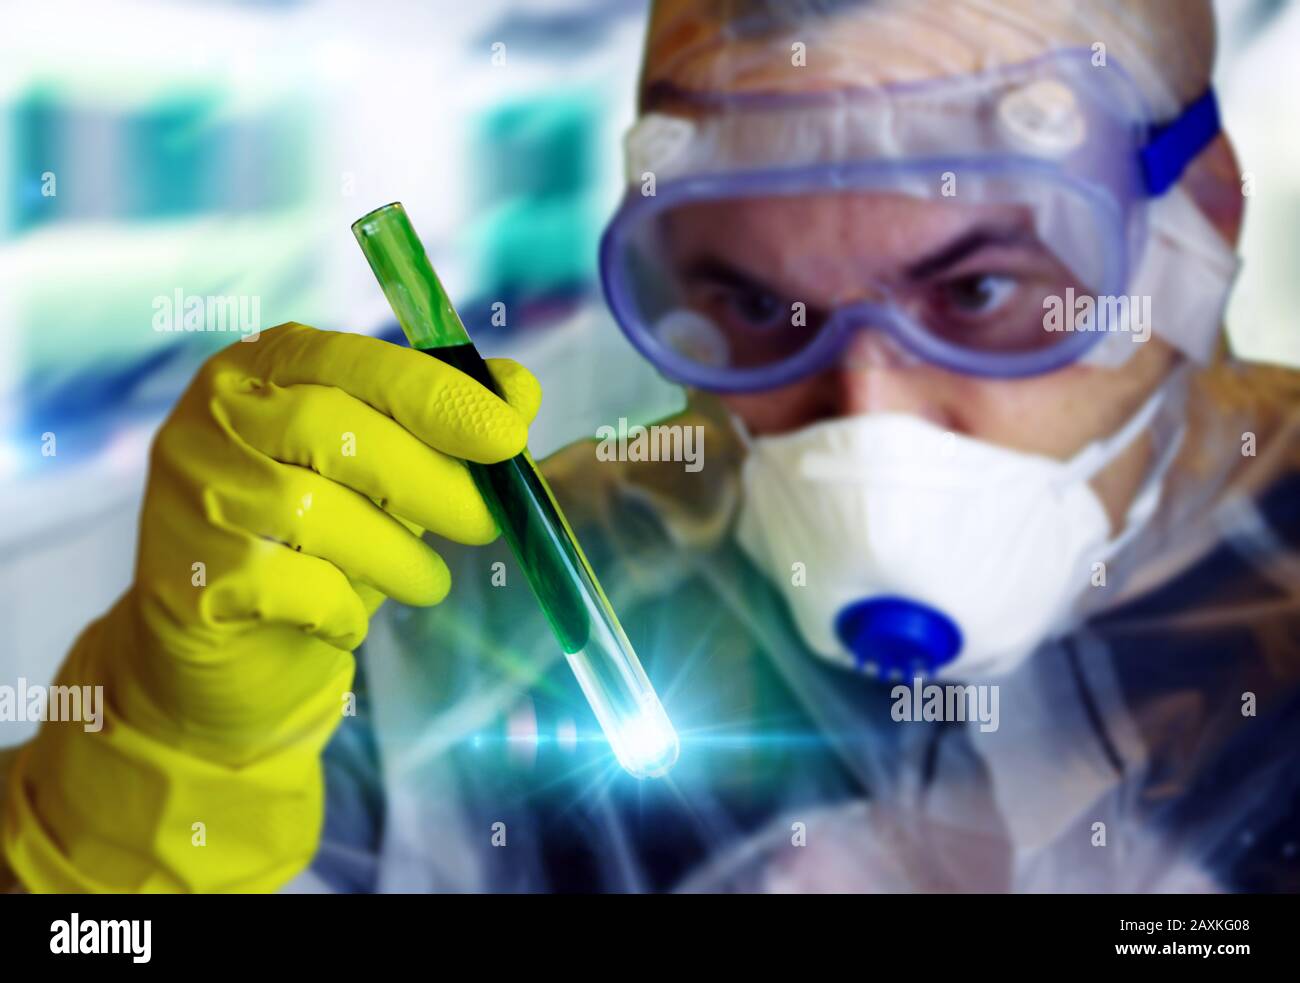 A scientist in a protective suit watching and analyzing the process in a test tube. Concept of innovation, research, science, virus, biology, chemistr Stock Photo